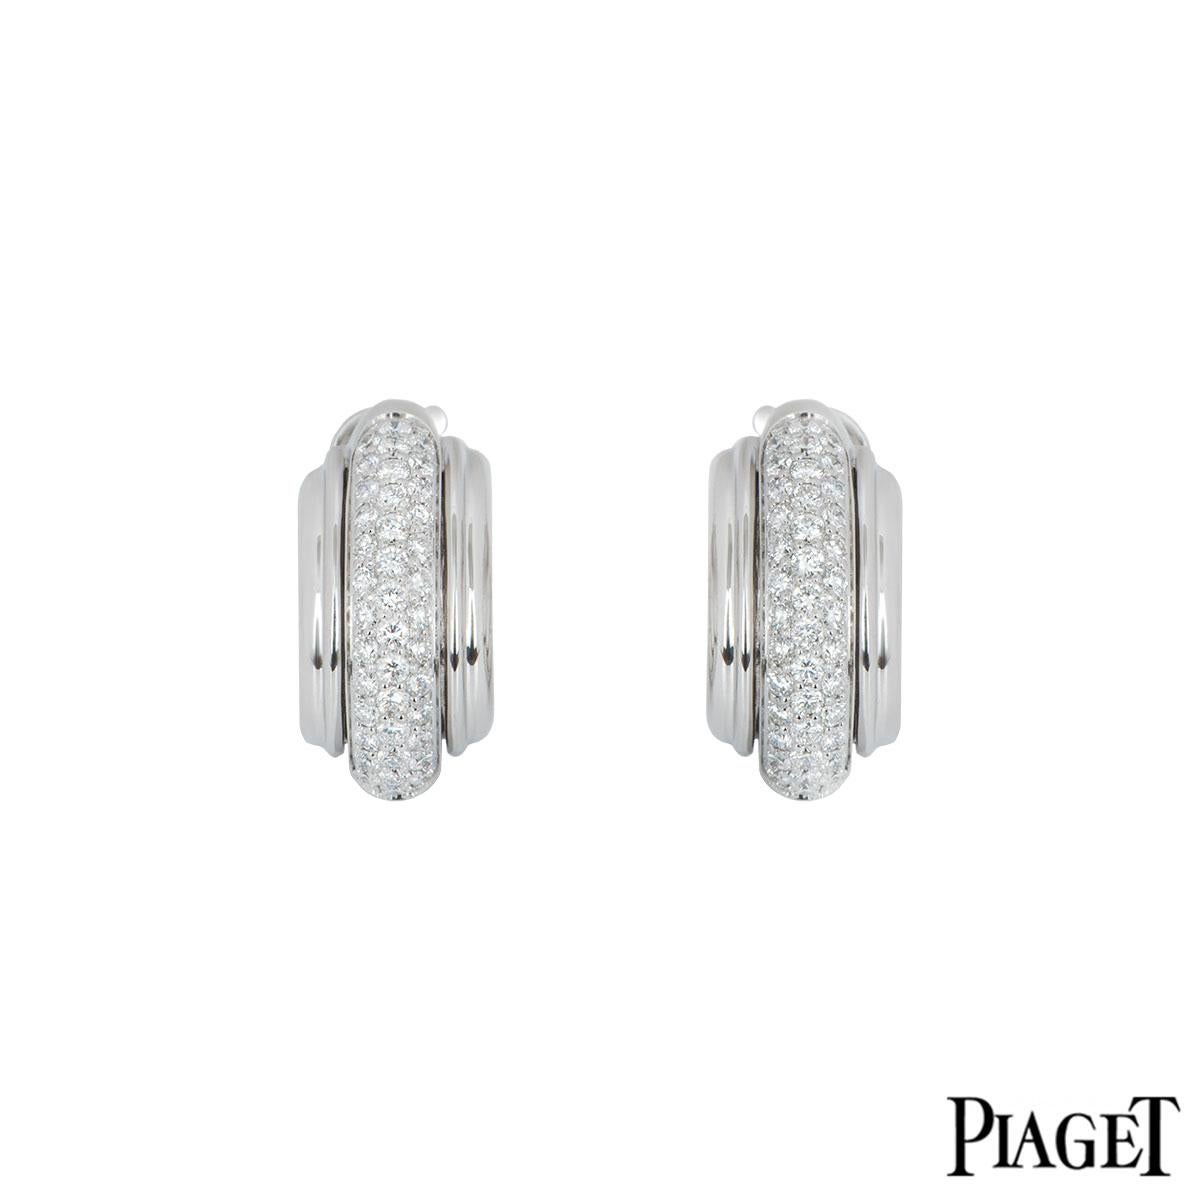 An 18k pair of white gold diamond earrings by Piaget from the Possession collection. The earrings are each set with 46 round brilliant cut diamonds through the middle with a total approximate weight of 1.04ct with fluted borders beside it. The